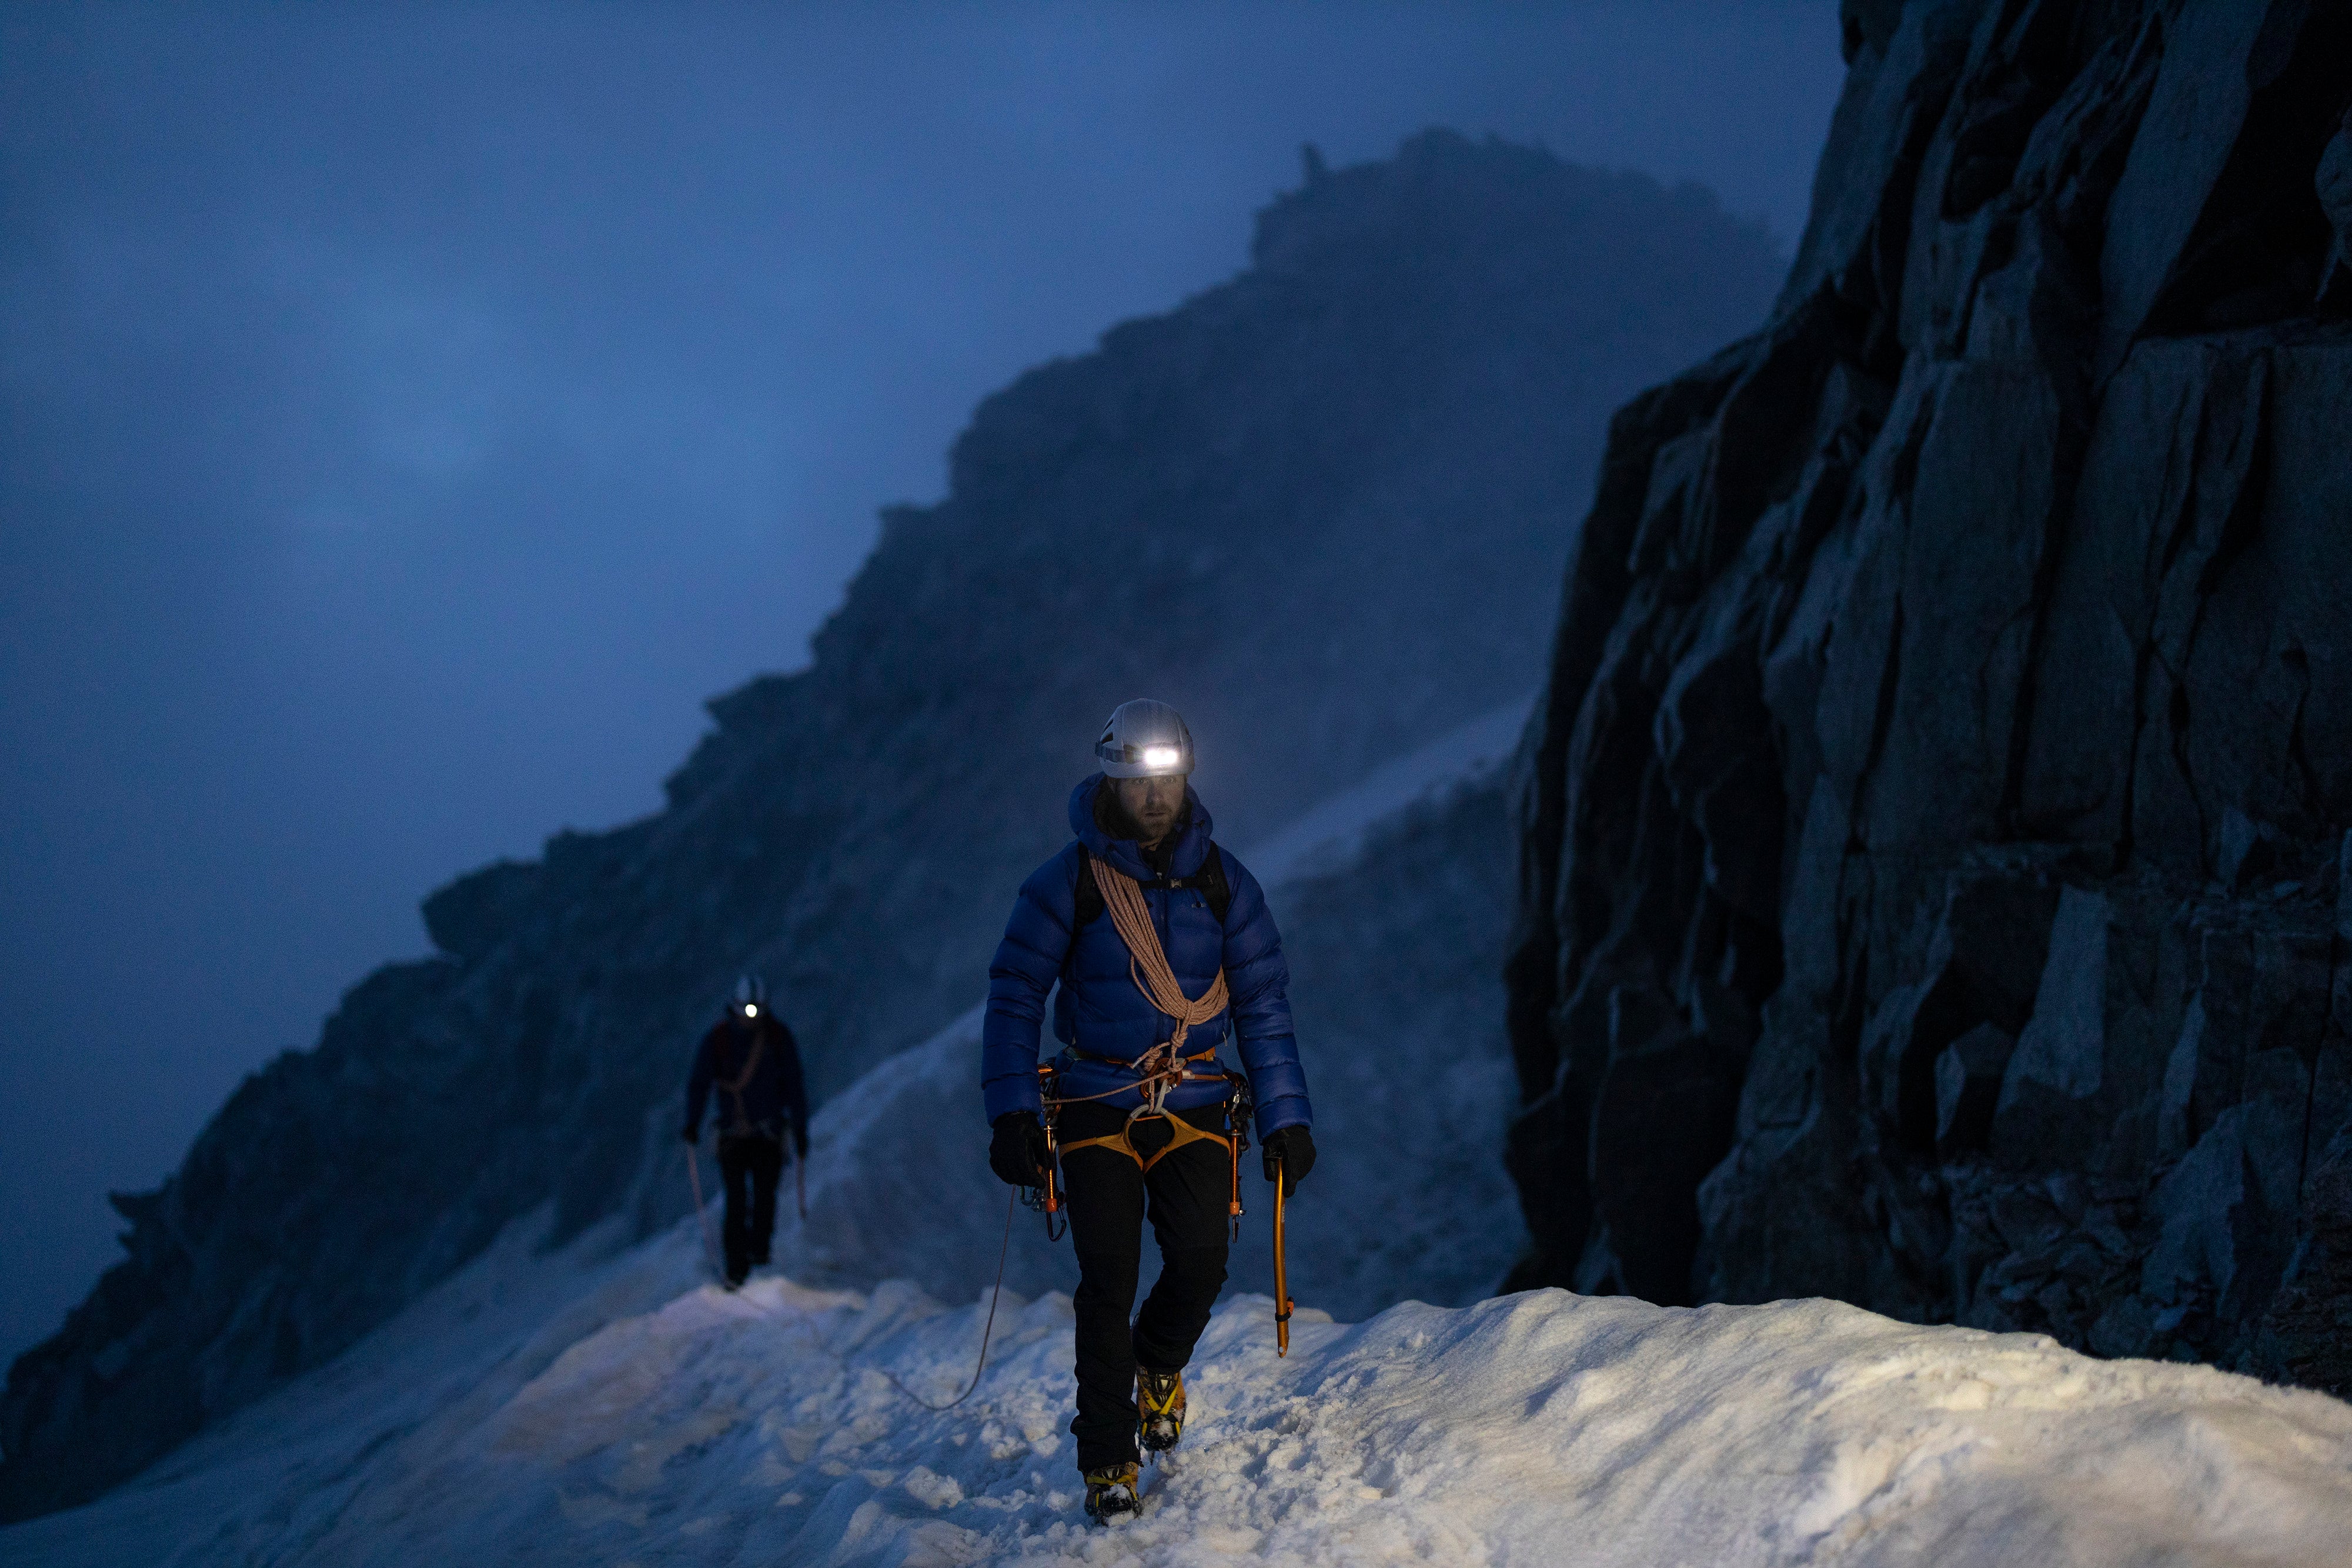 Two men crossing a snowy ridge by headtorch in the French Alps